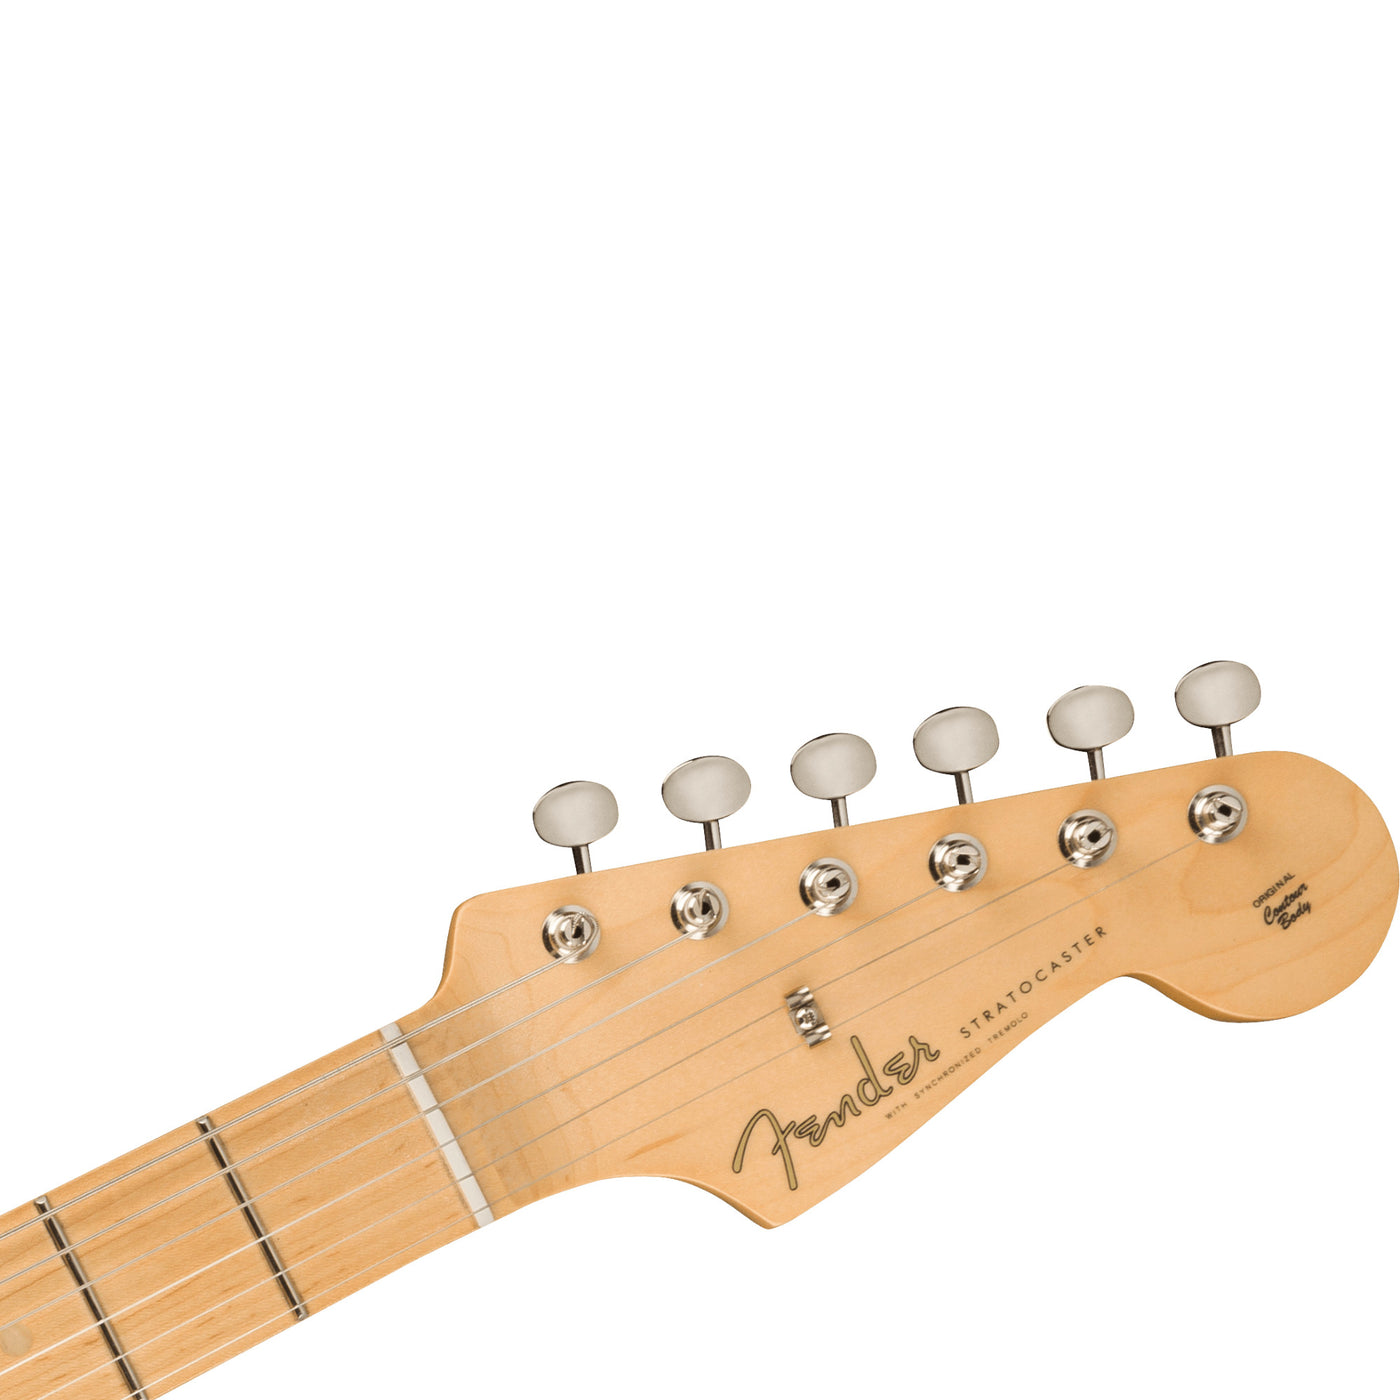 Fender Steve Lacy People Pleaser Stratocaster Electric Guitar, with Maple Fingerboard, Chaos Burst (0142912785)